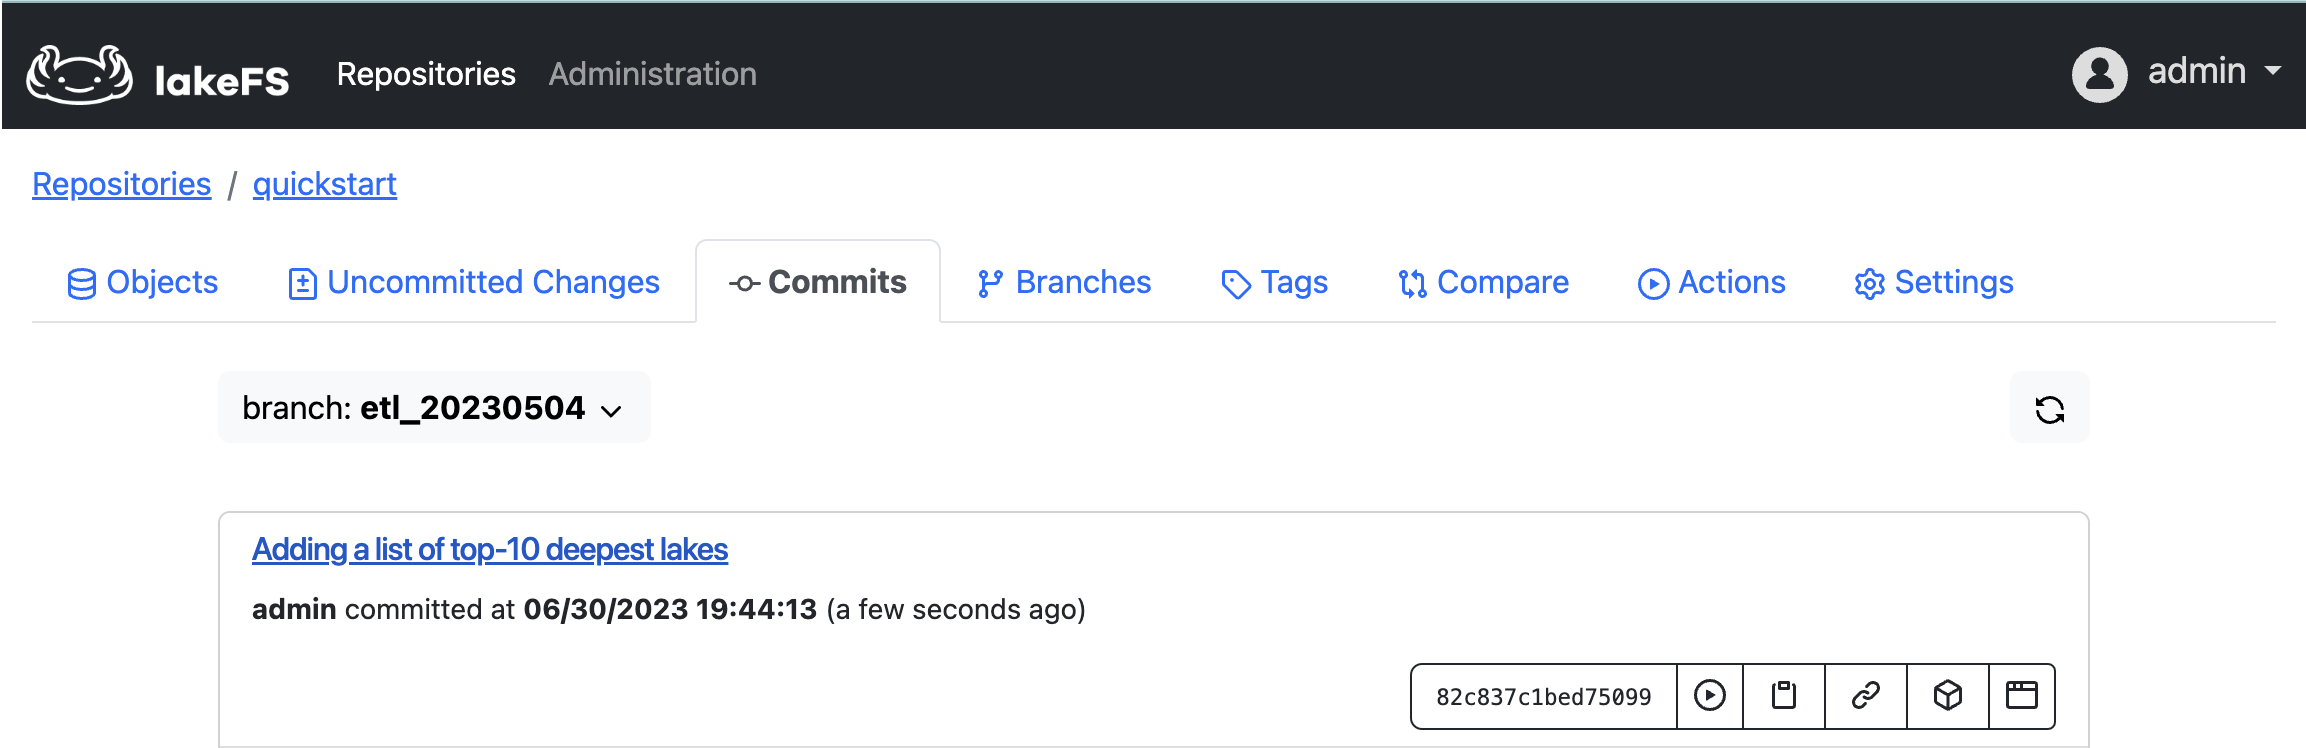 Commit history in lakeFS showing that the commit met the rules set by the action and completed successfully.